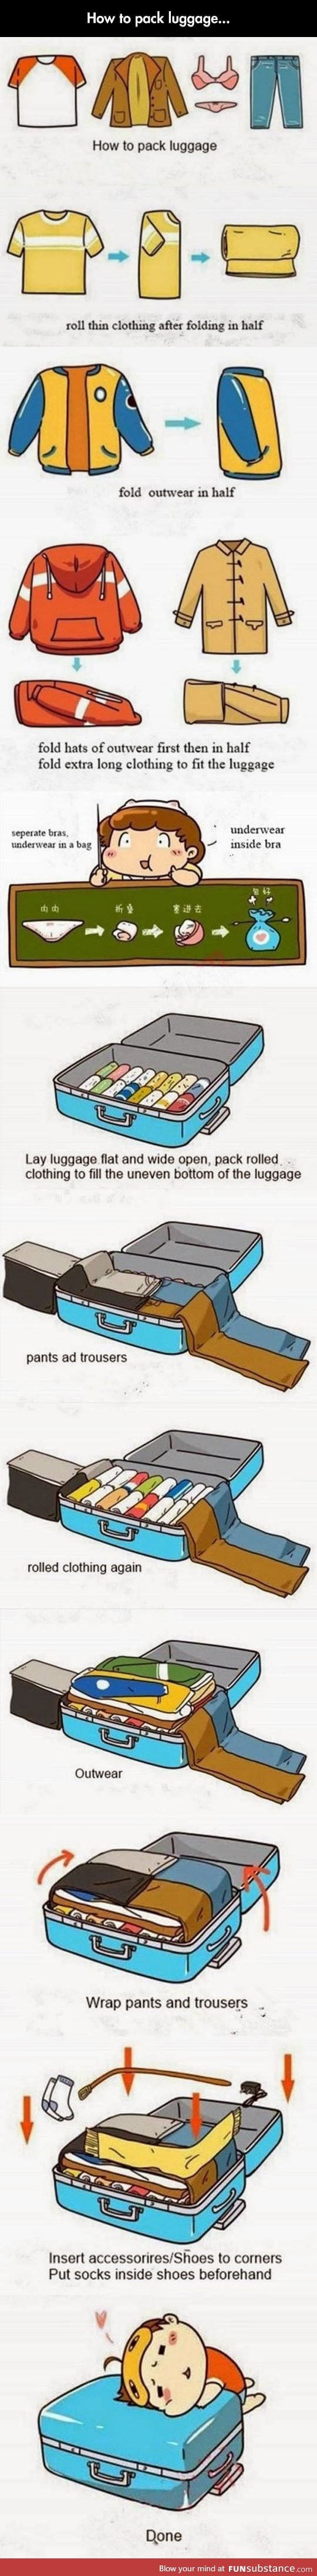 How to pack your luggage efficiently